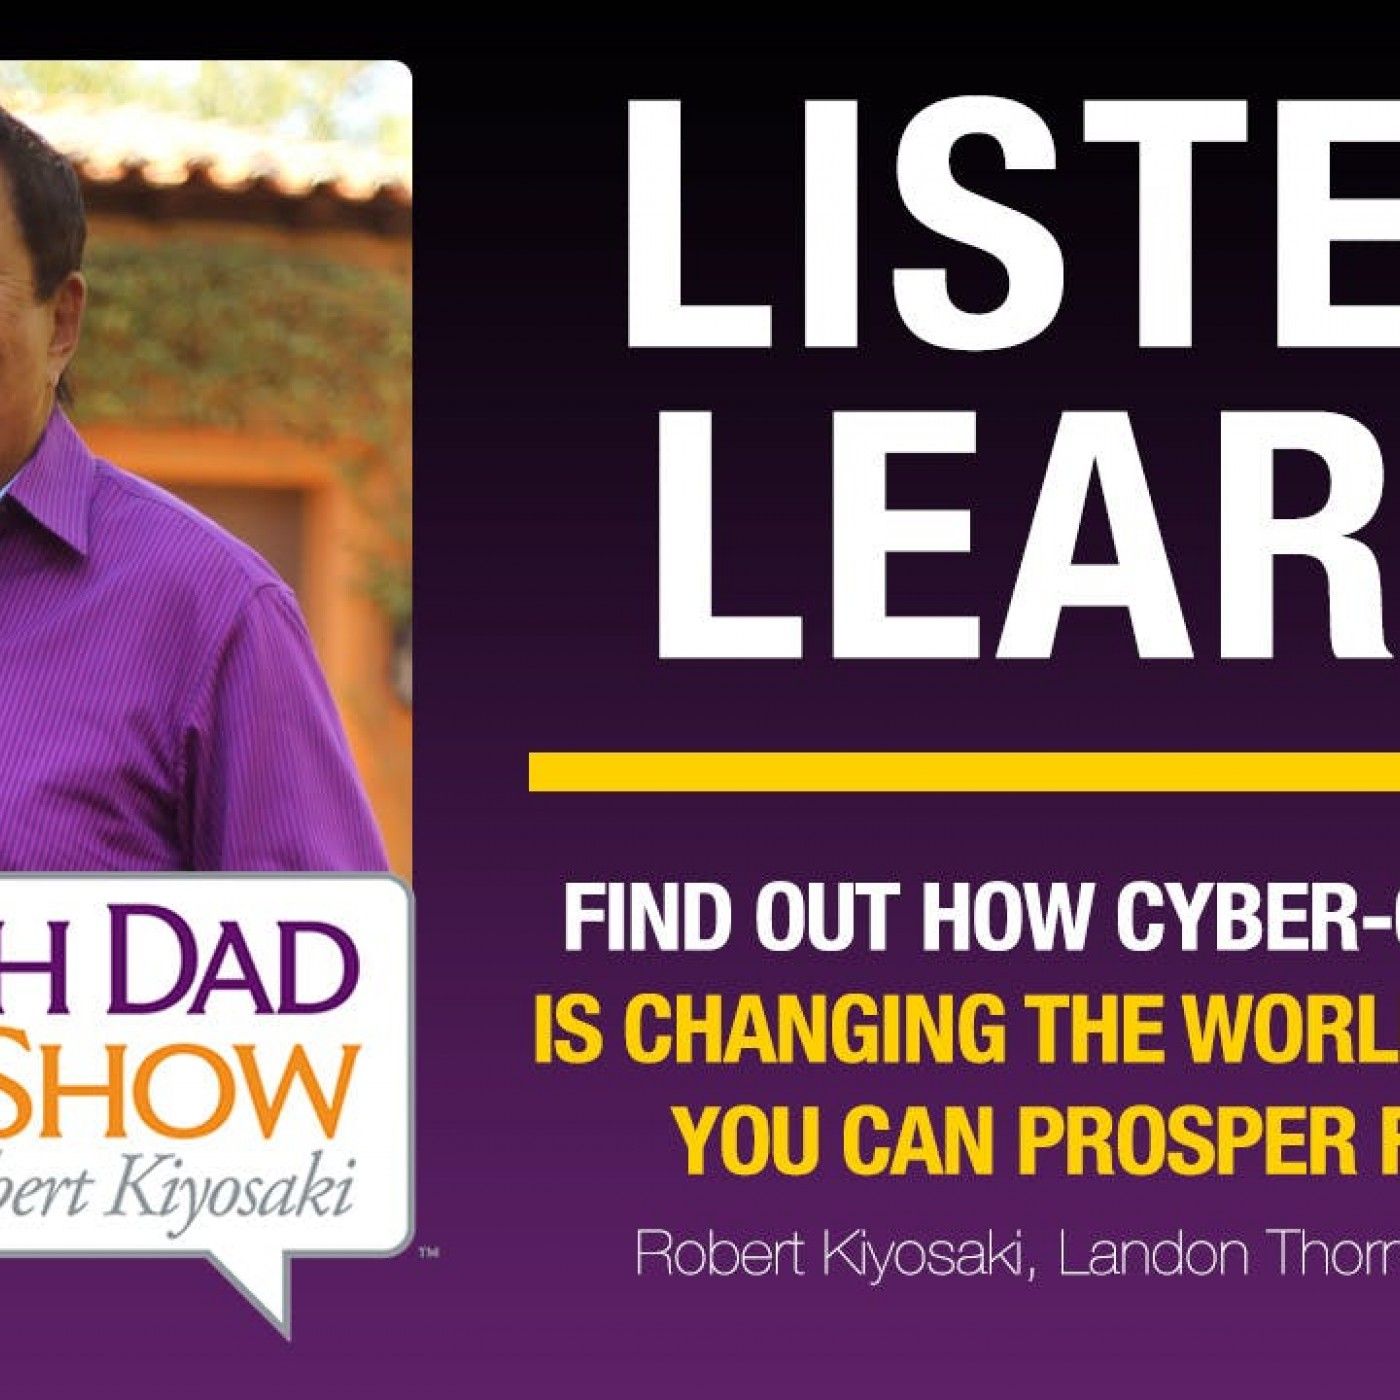 FIND OUT HOW CYBER-CURRENCY IS CHANGING THE WORLD AND HOW YOU CAN PROSPER FROM IT - Robert Kiyosaki, Landon Thorne, Joel Flint